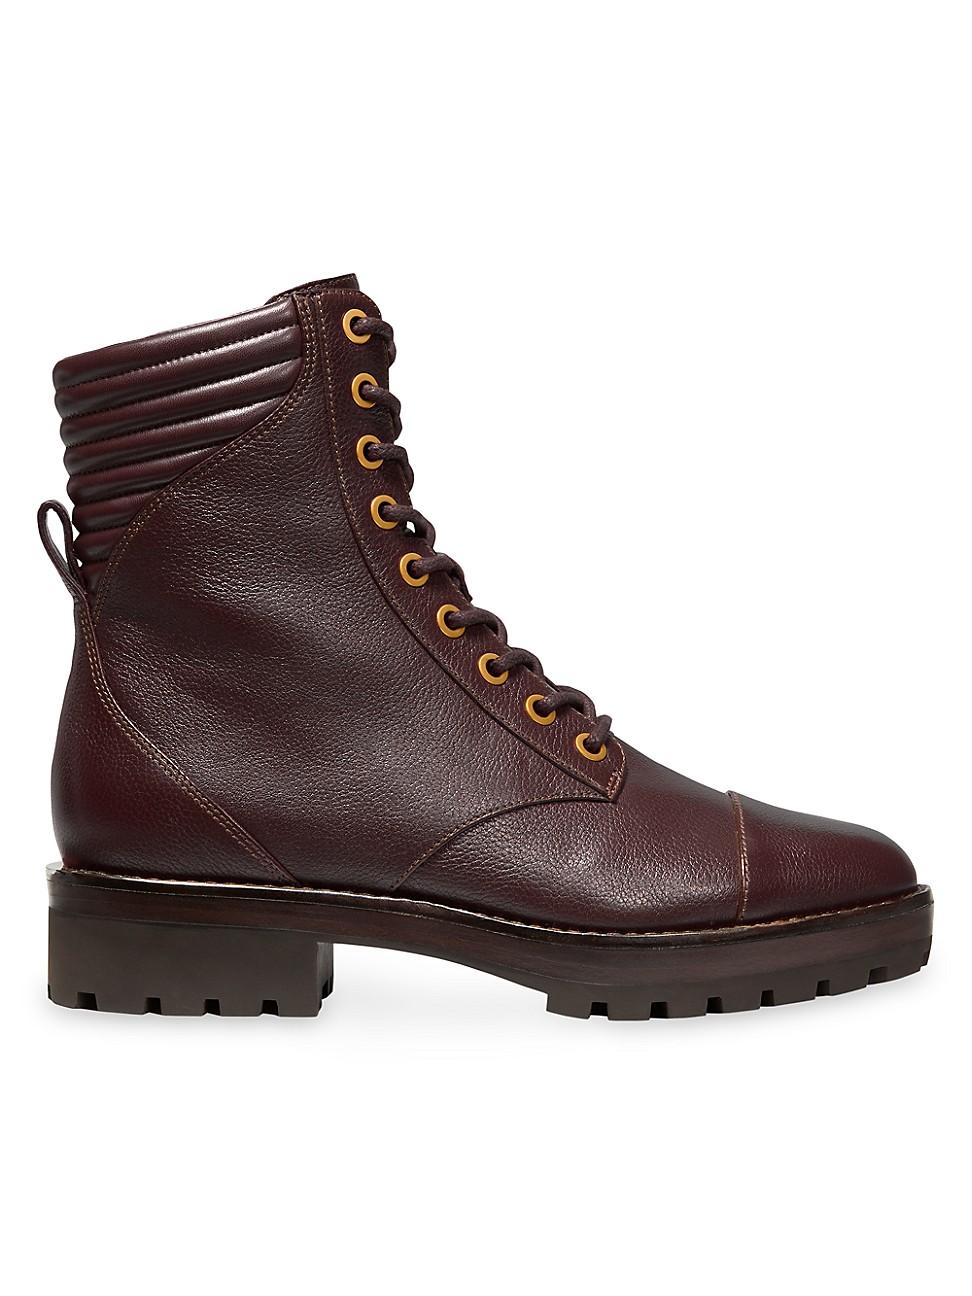 MICHAEL Michael Kors Bastian Tumbled Leather Combat Boot in Brown | Lyst